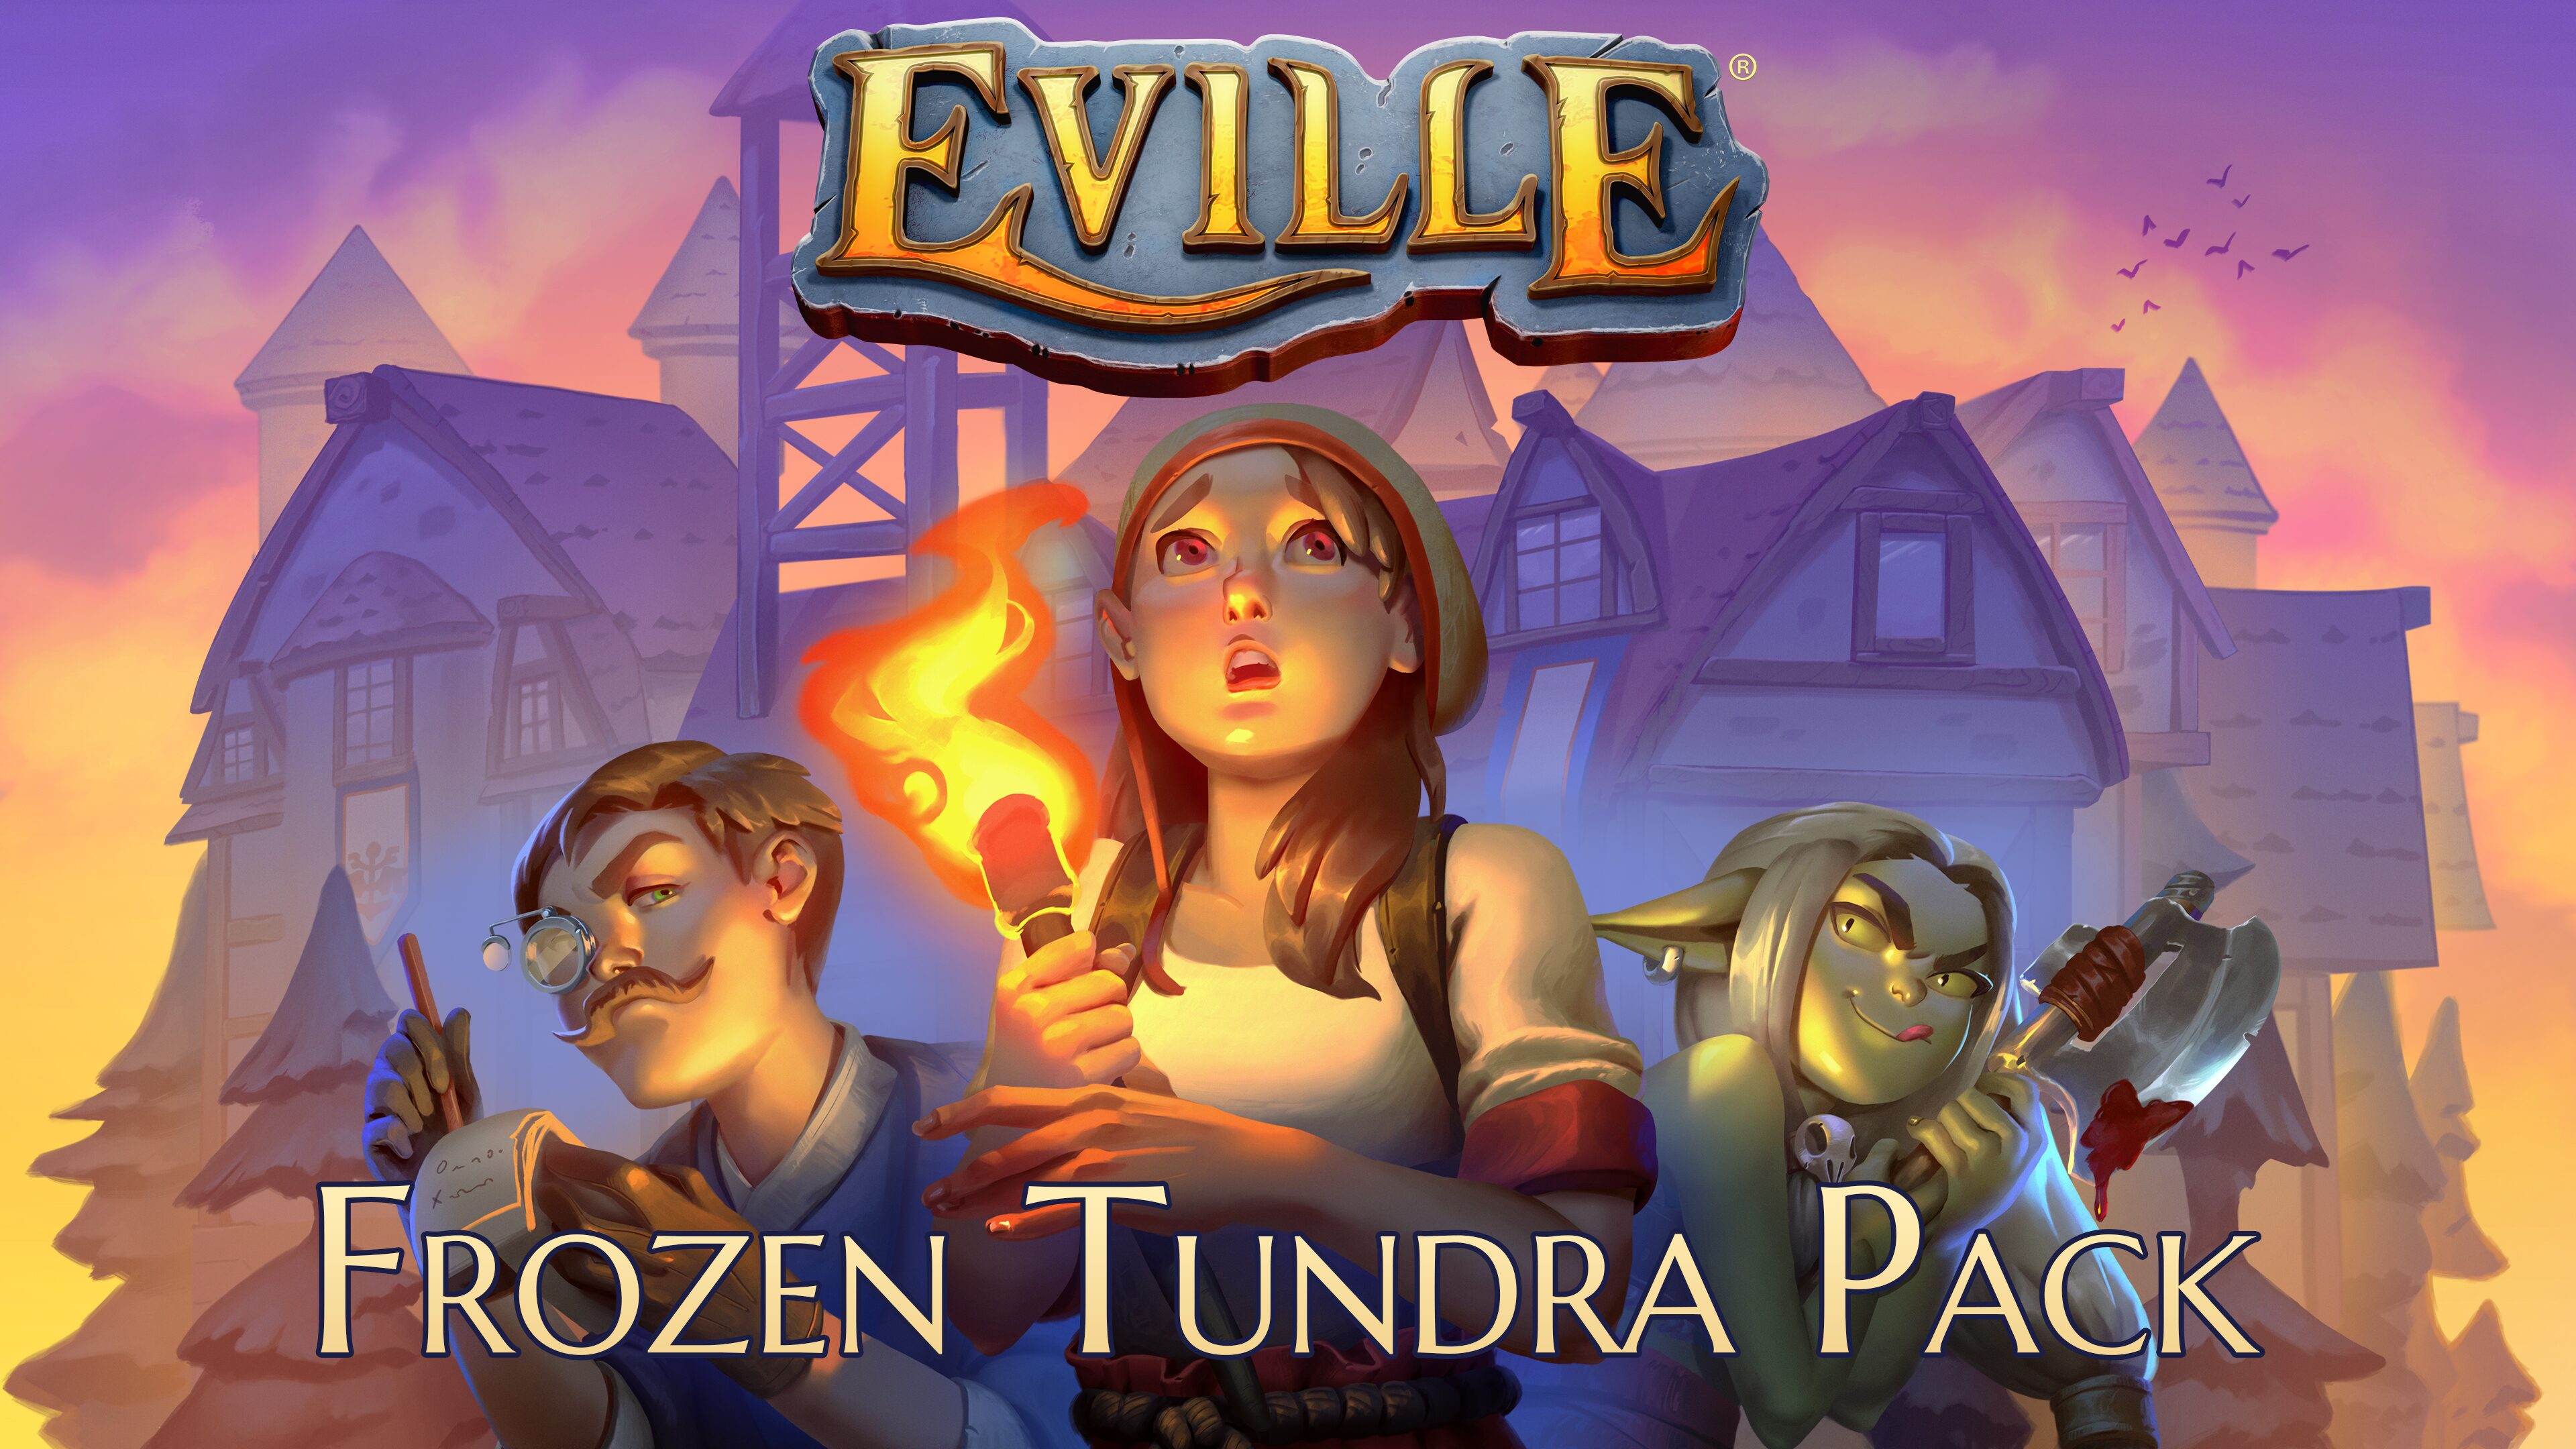 Eville: Frozen Tundra Pack